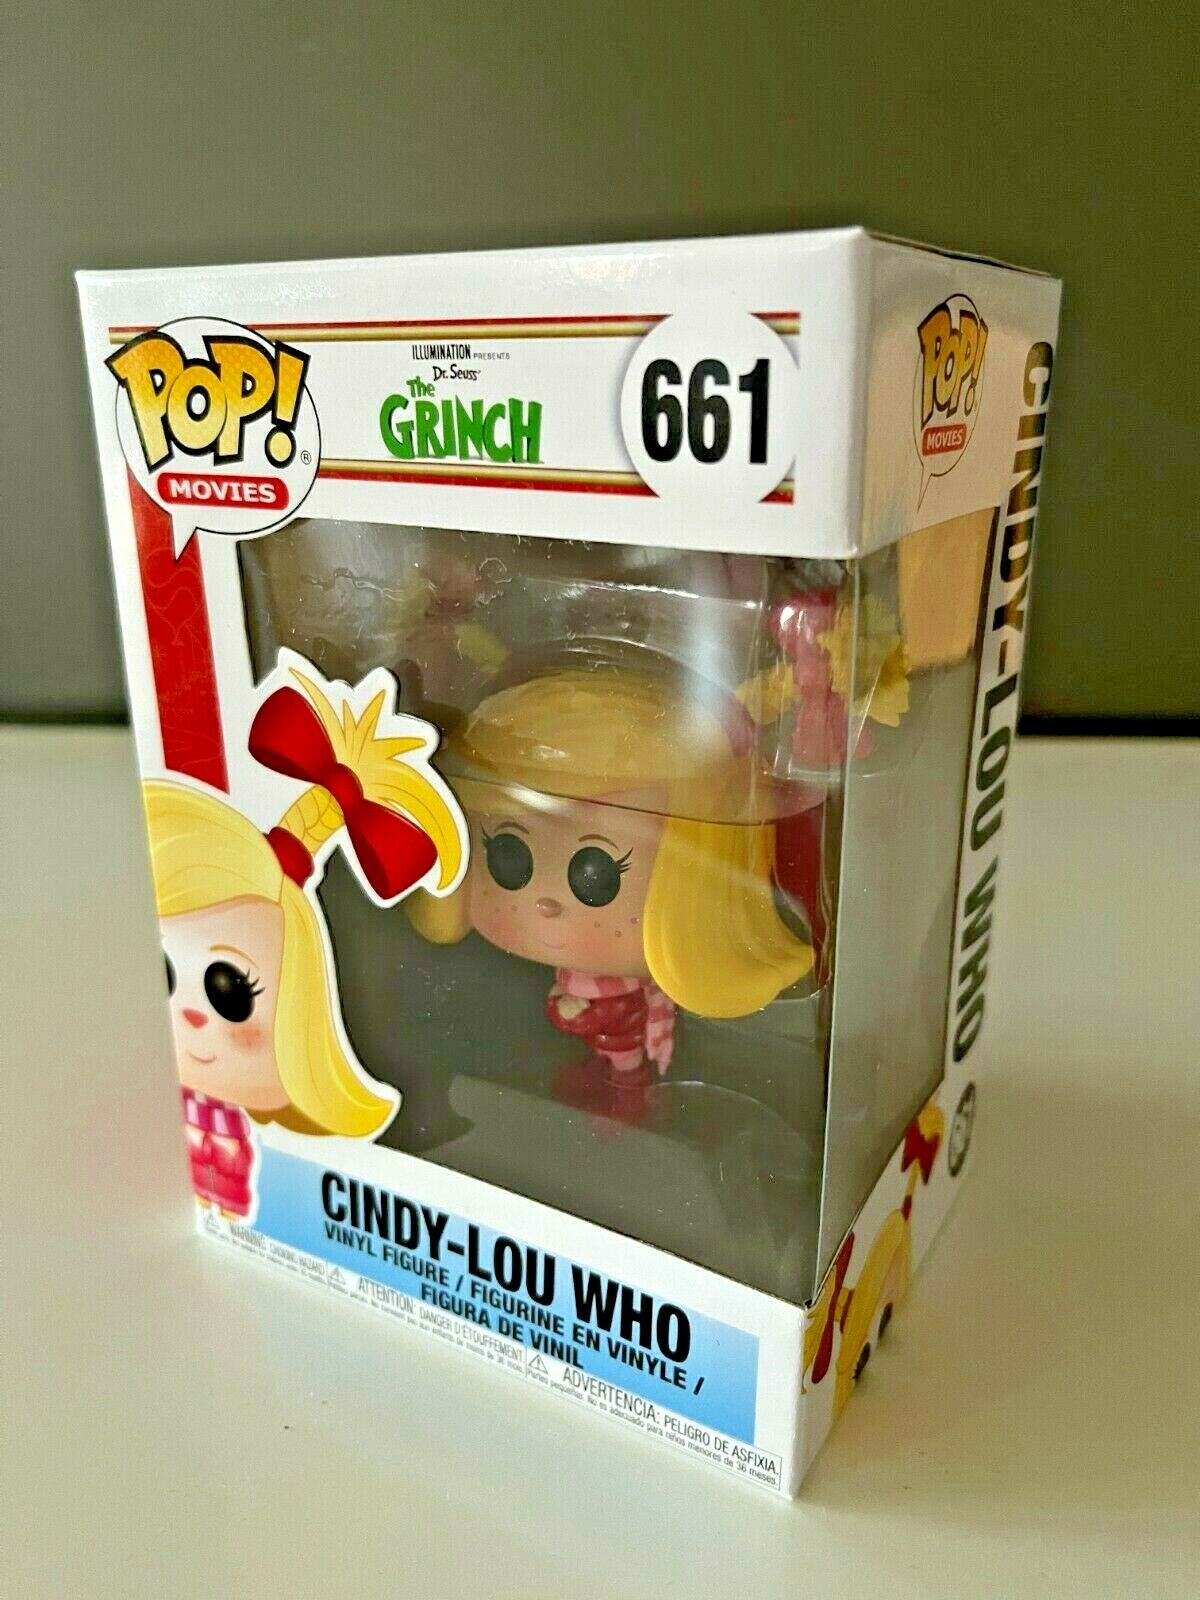 Funko POP Movies Dr. Seuss The Grinch 661 - CINDY-LOU WHO - - END OF TOYS STORE